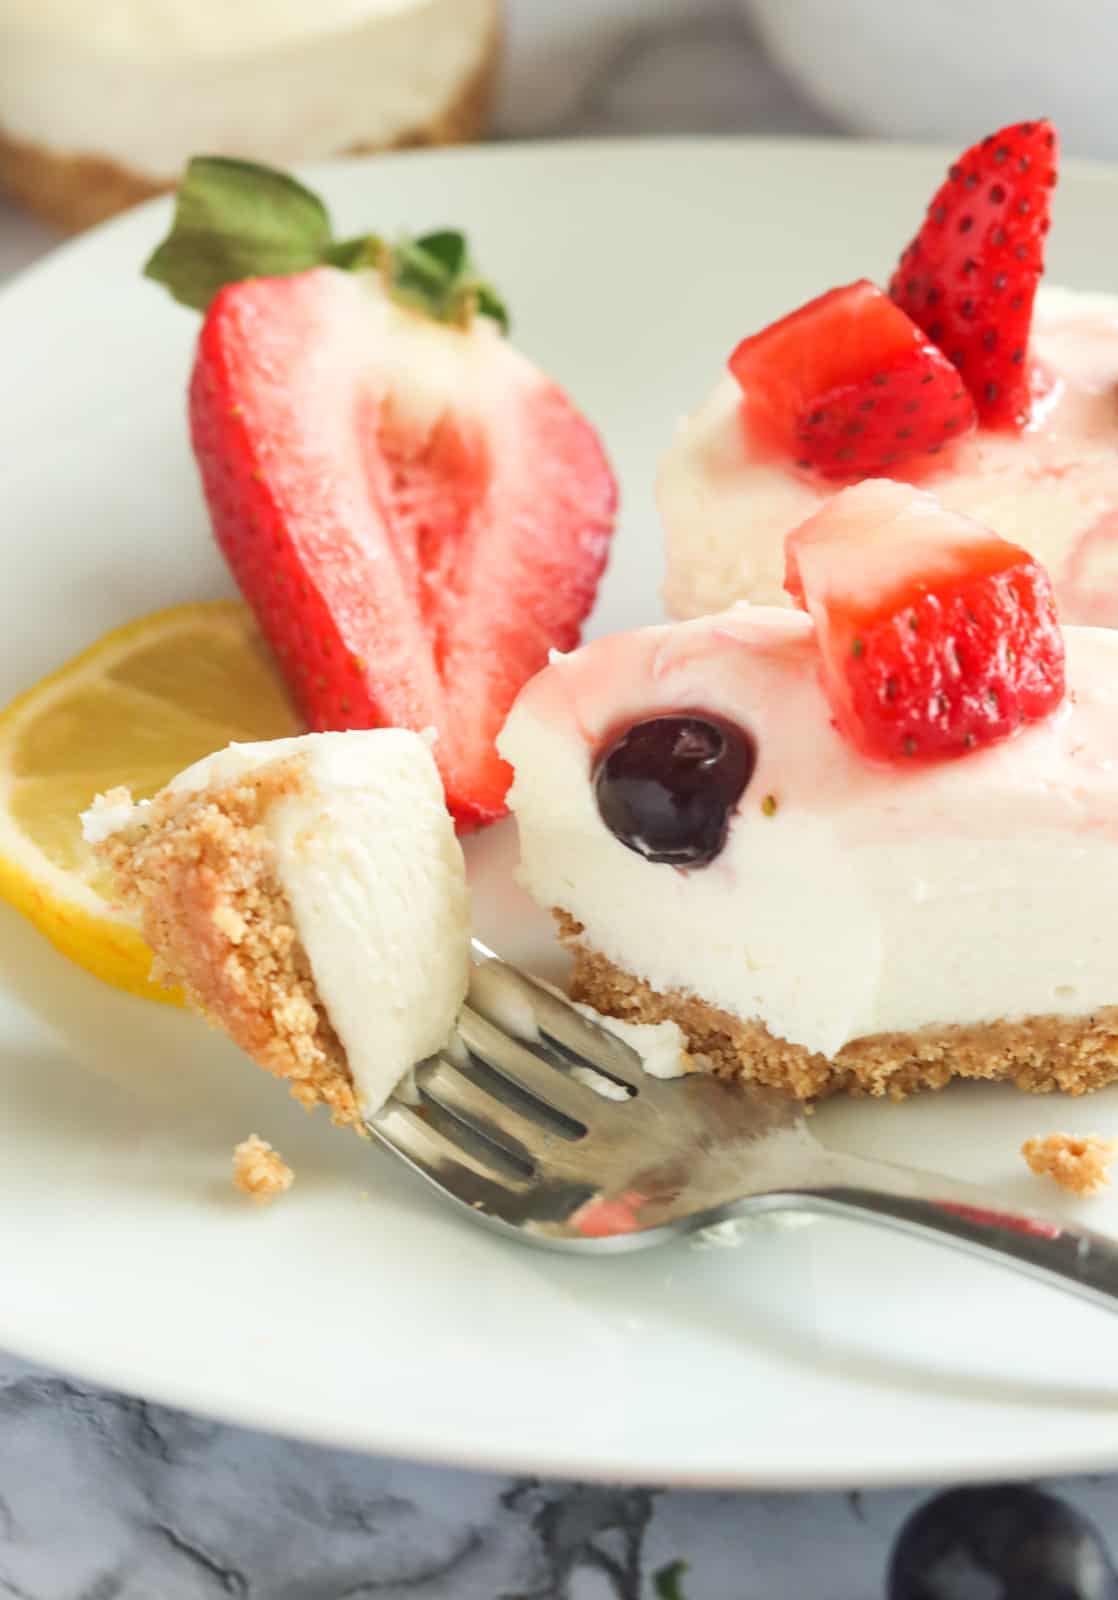 Take a bite of the insanely delicious no-bake cheesecake with berries and cherries